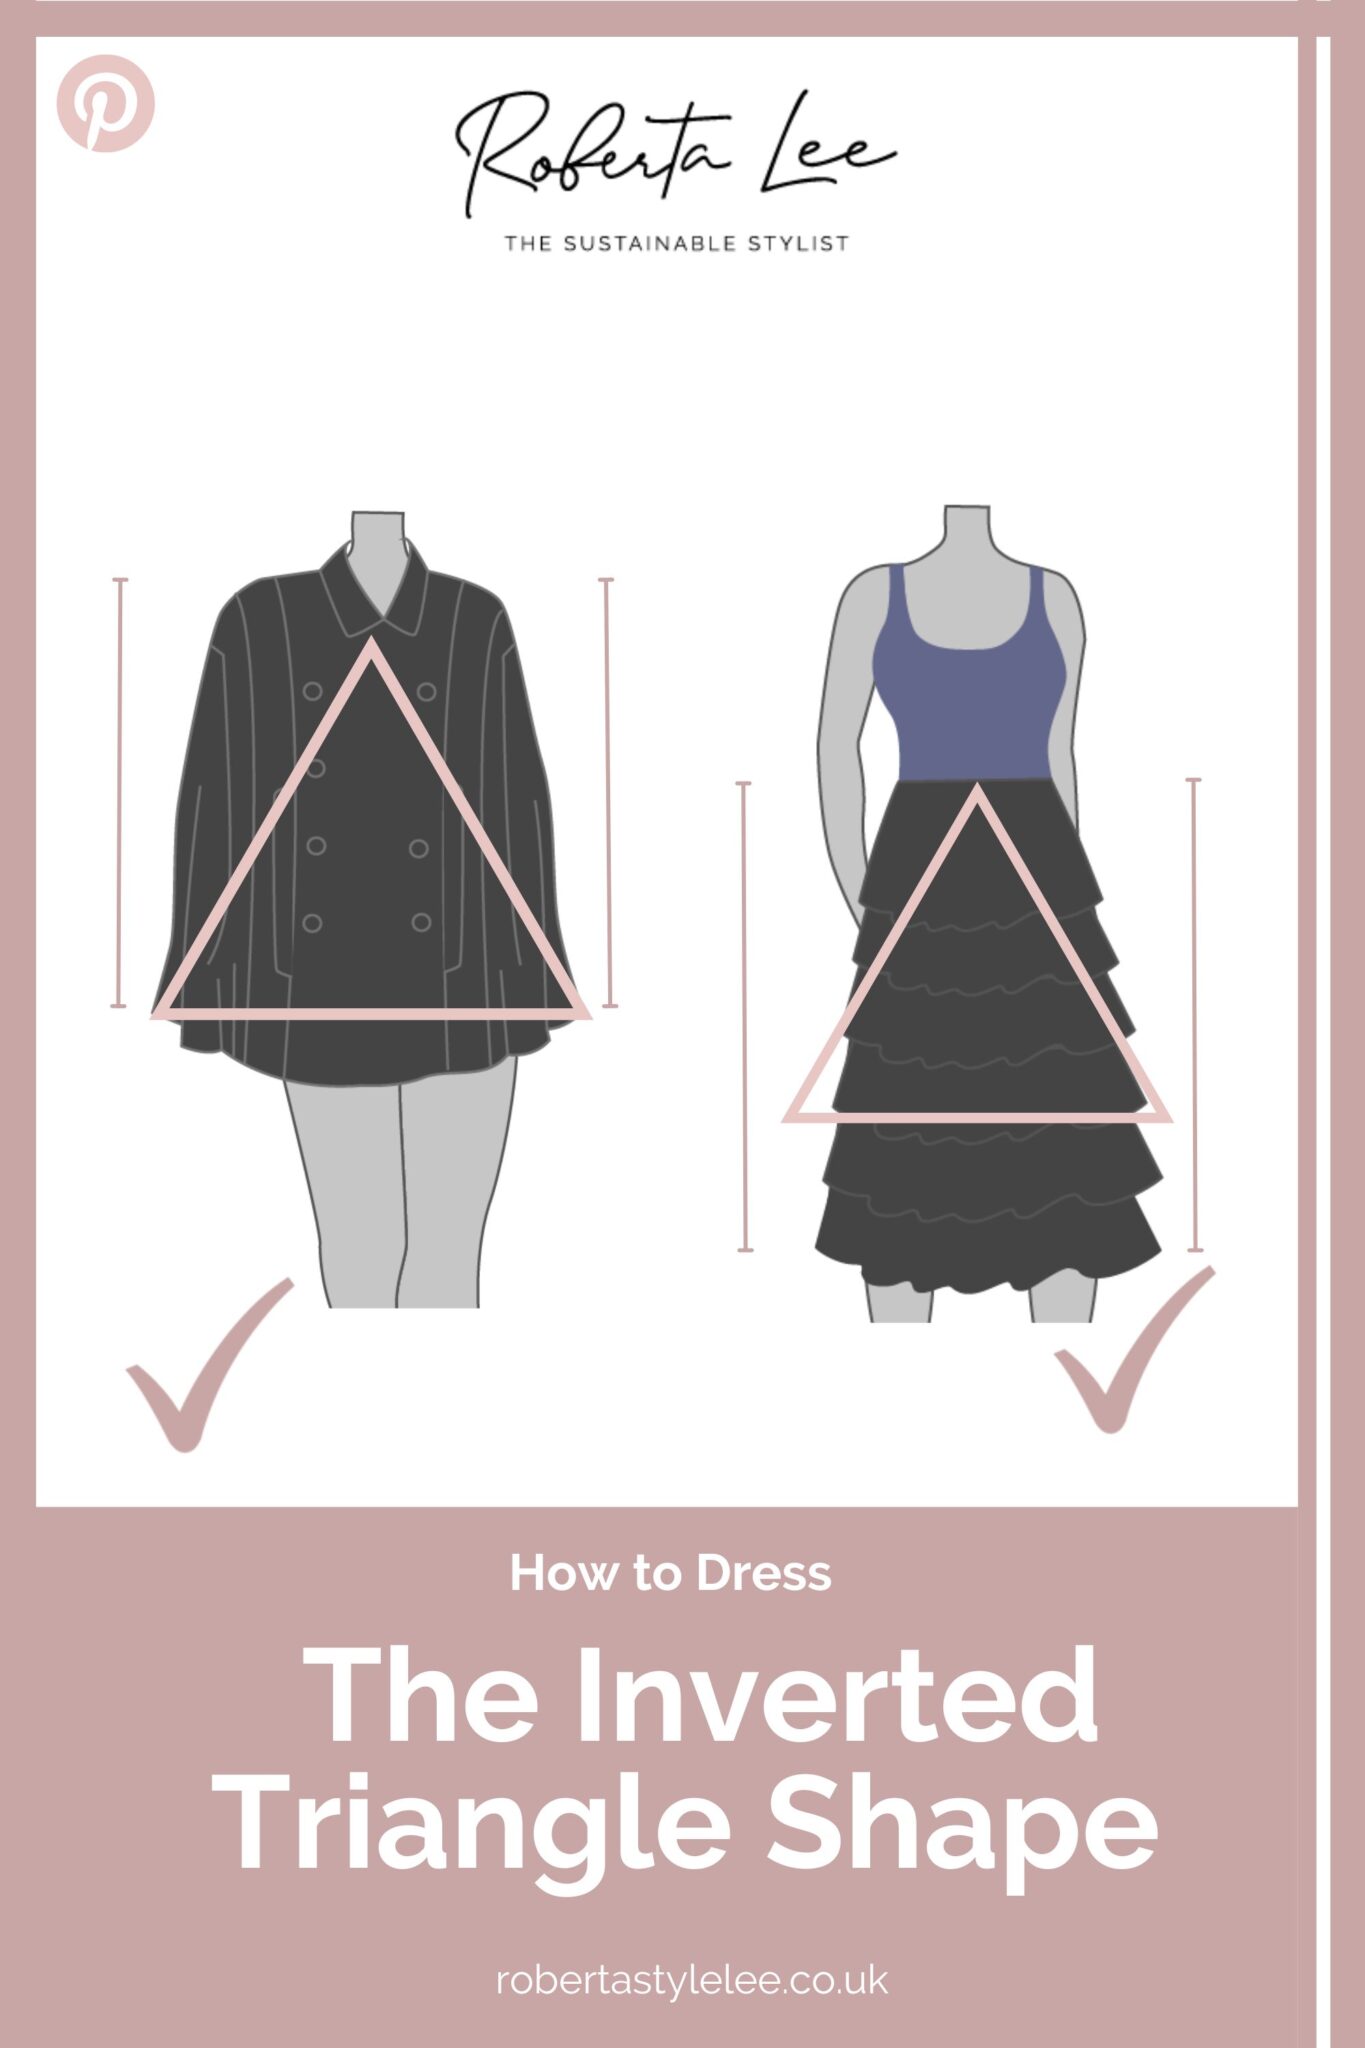 Inverted Triangle Body Shape Guide - Roberta Lee - The Sustainable Stylist